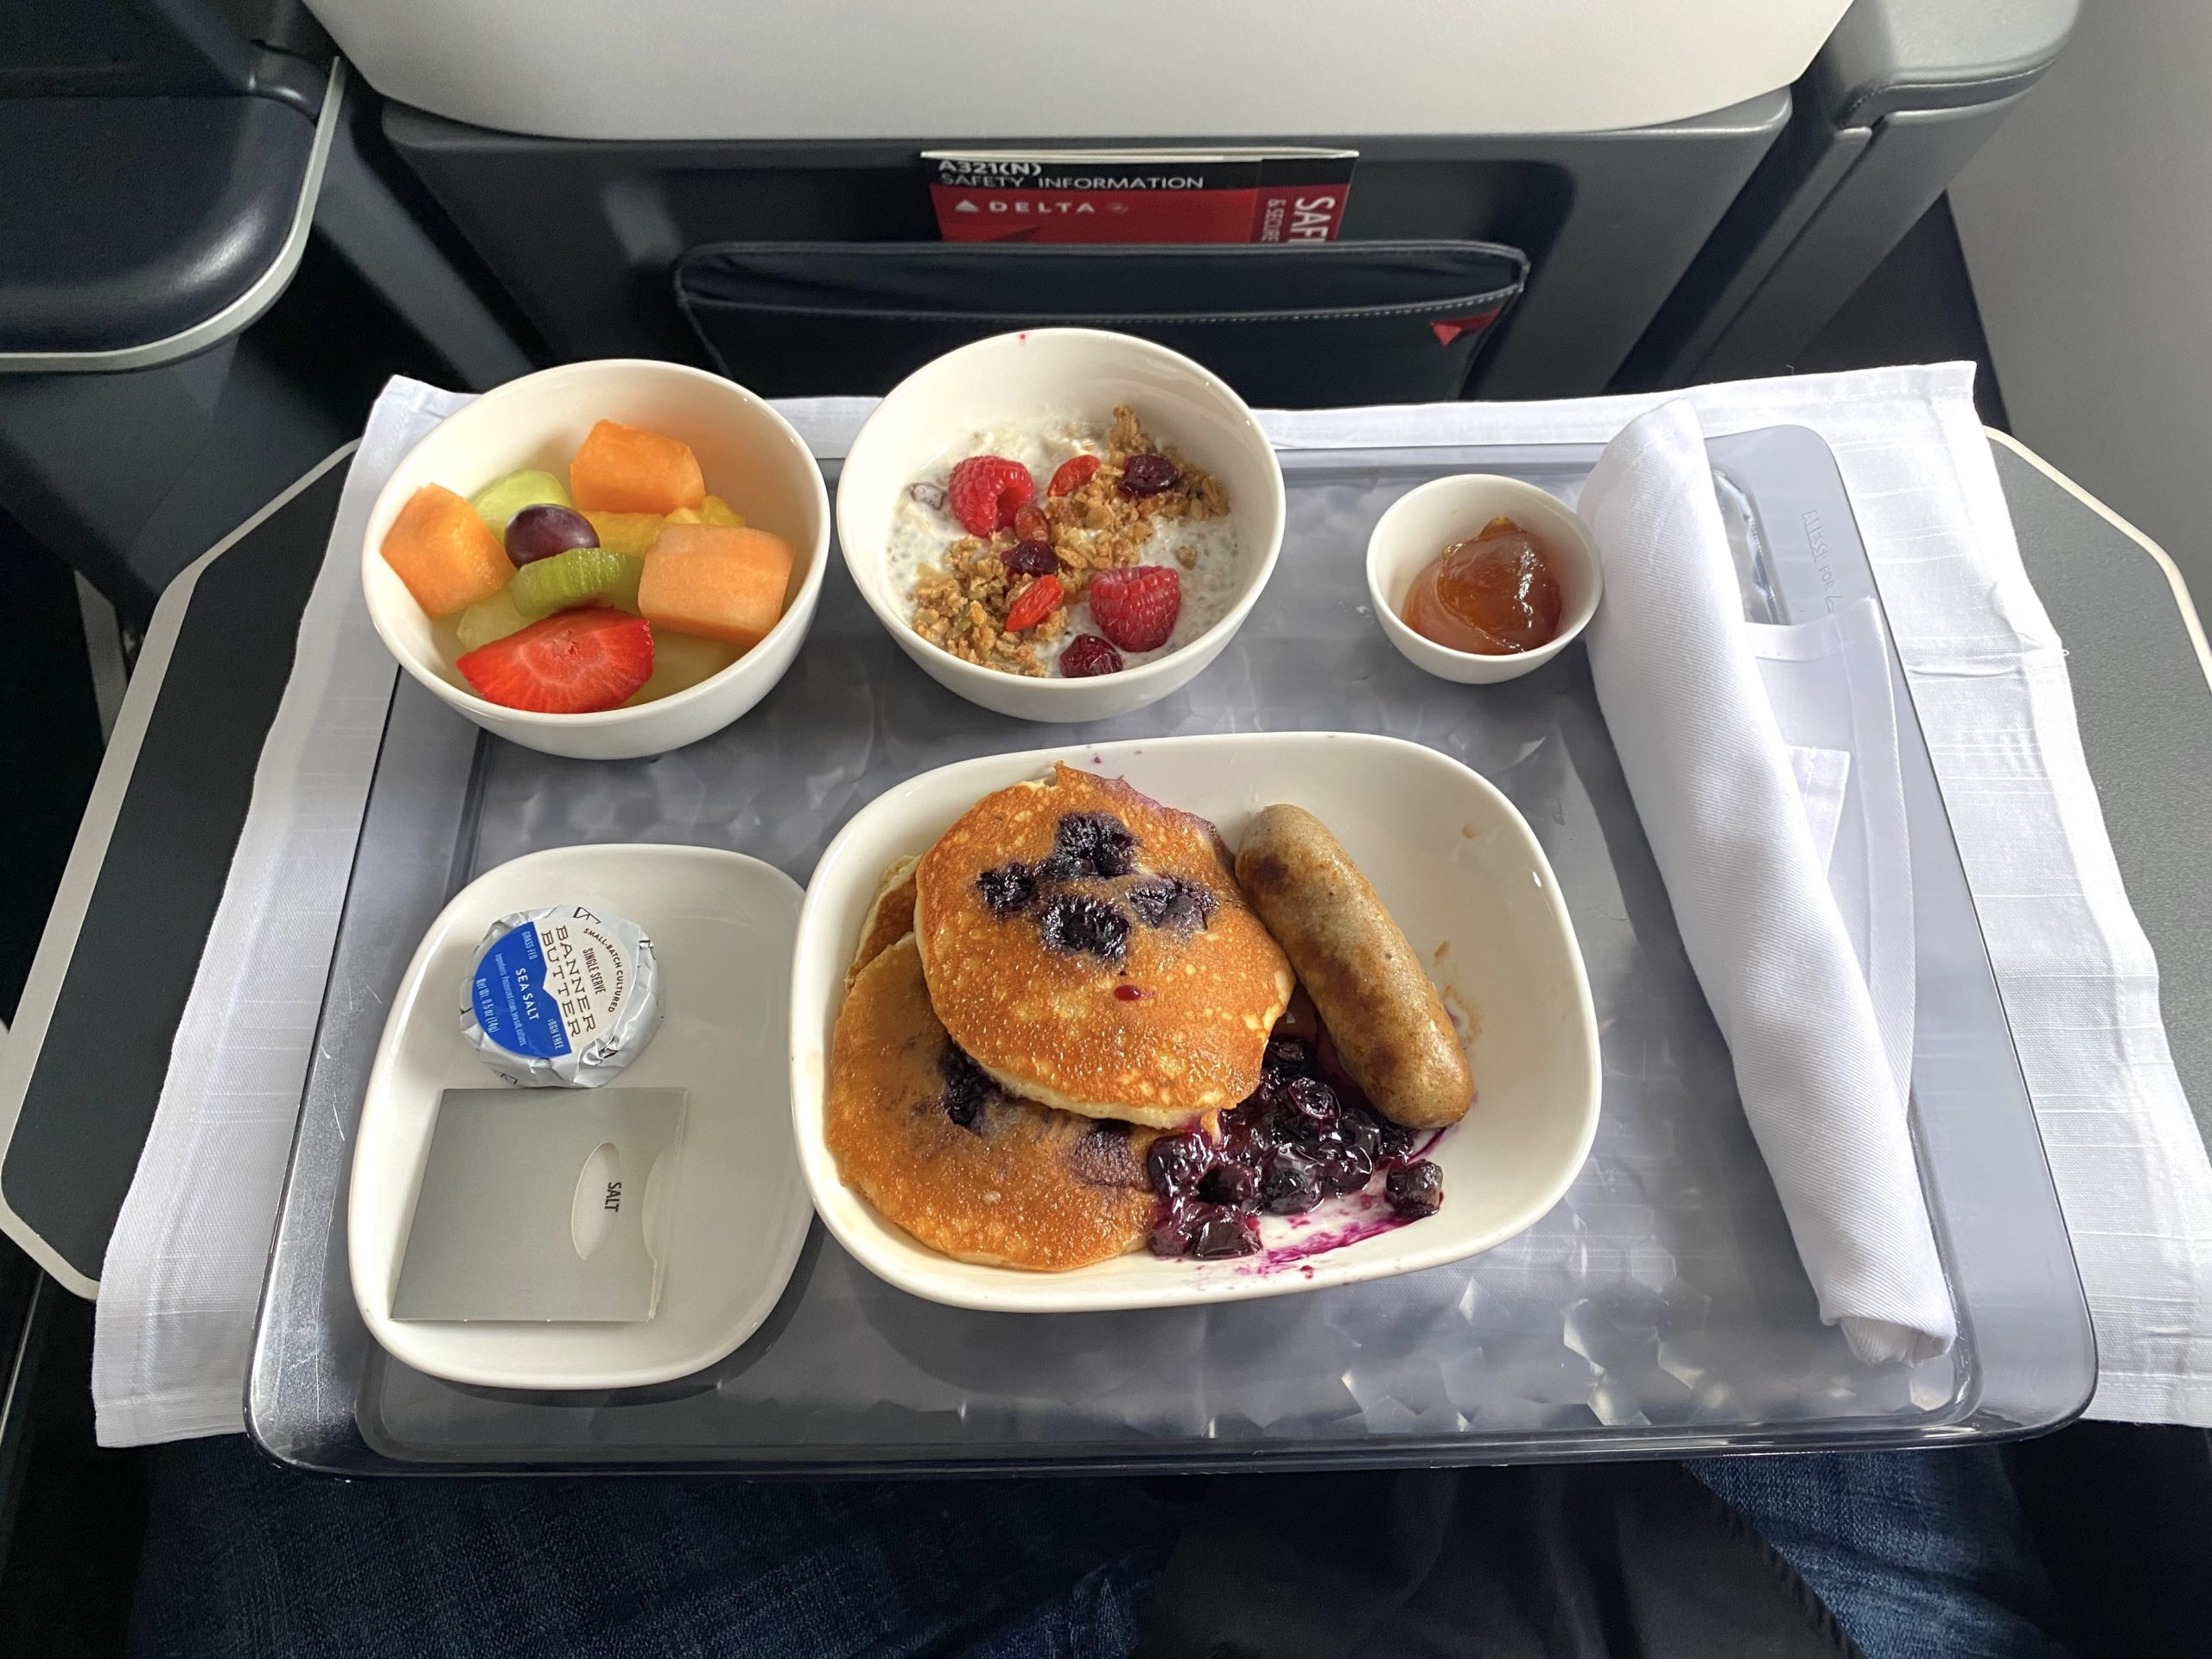 Yum! Delta Blueberry Pancakes First Class Breakfast [Review] Eye of